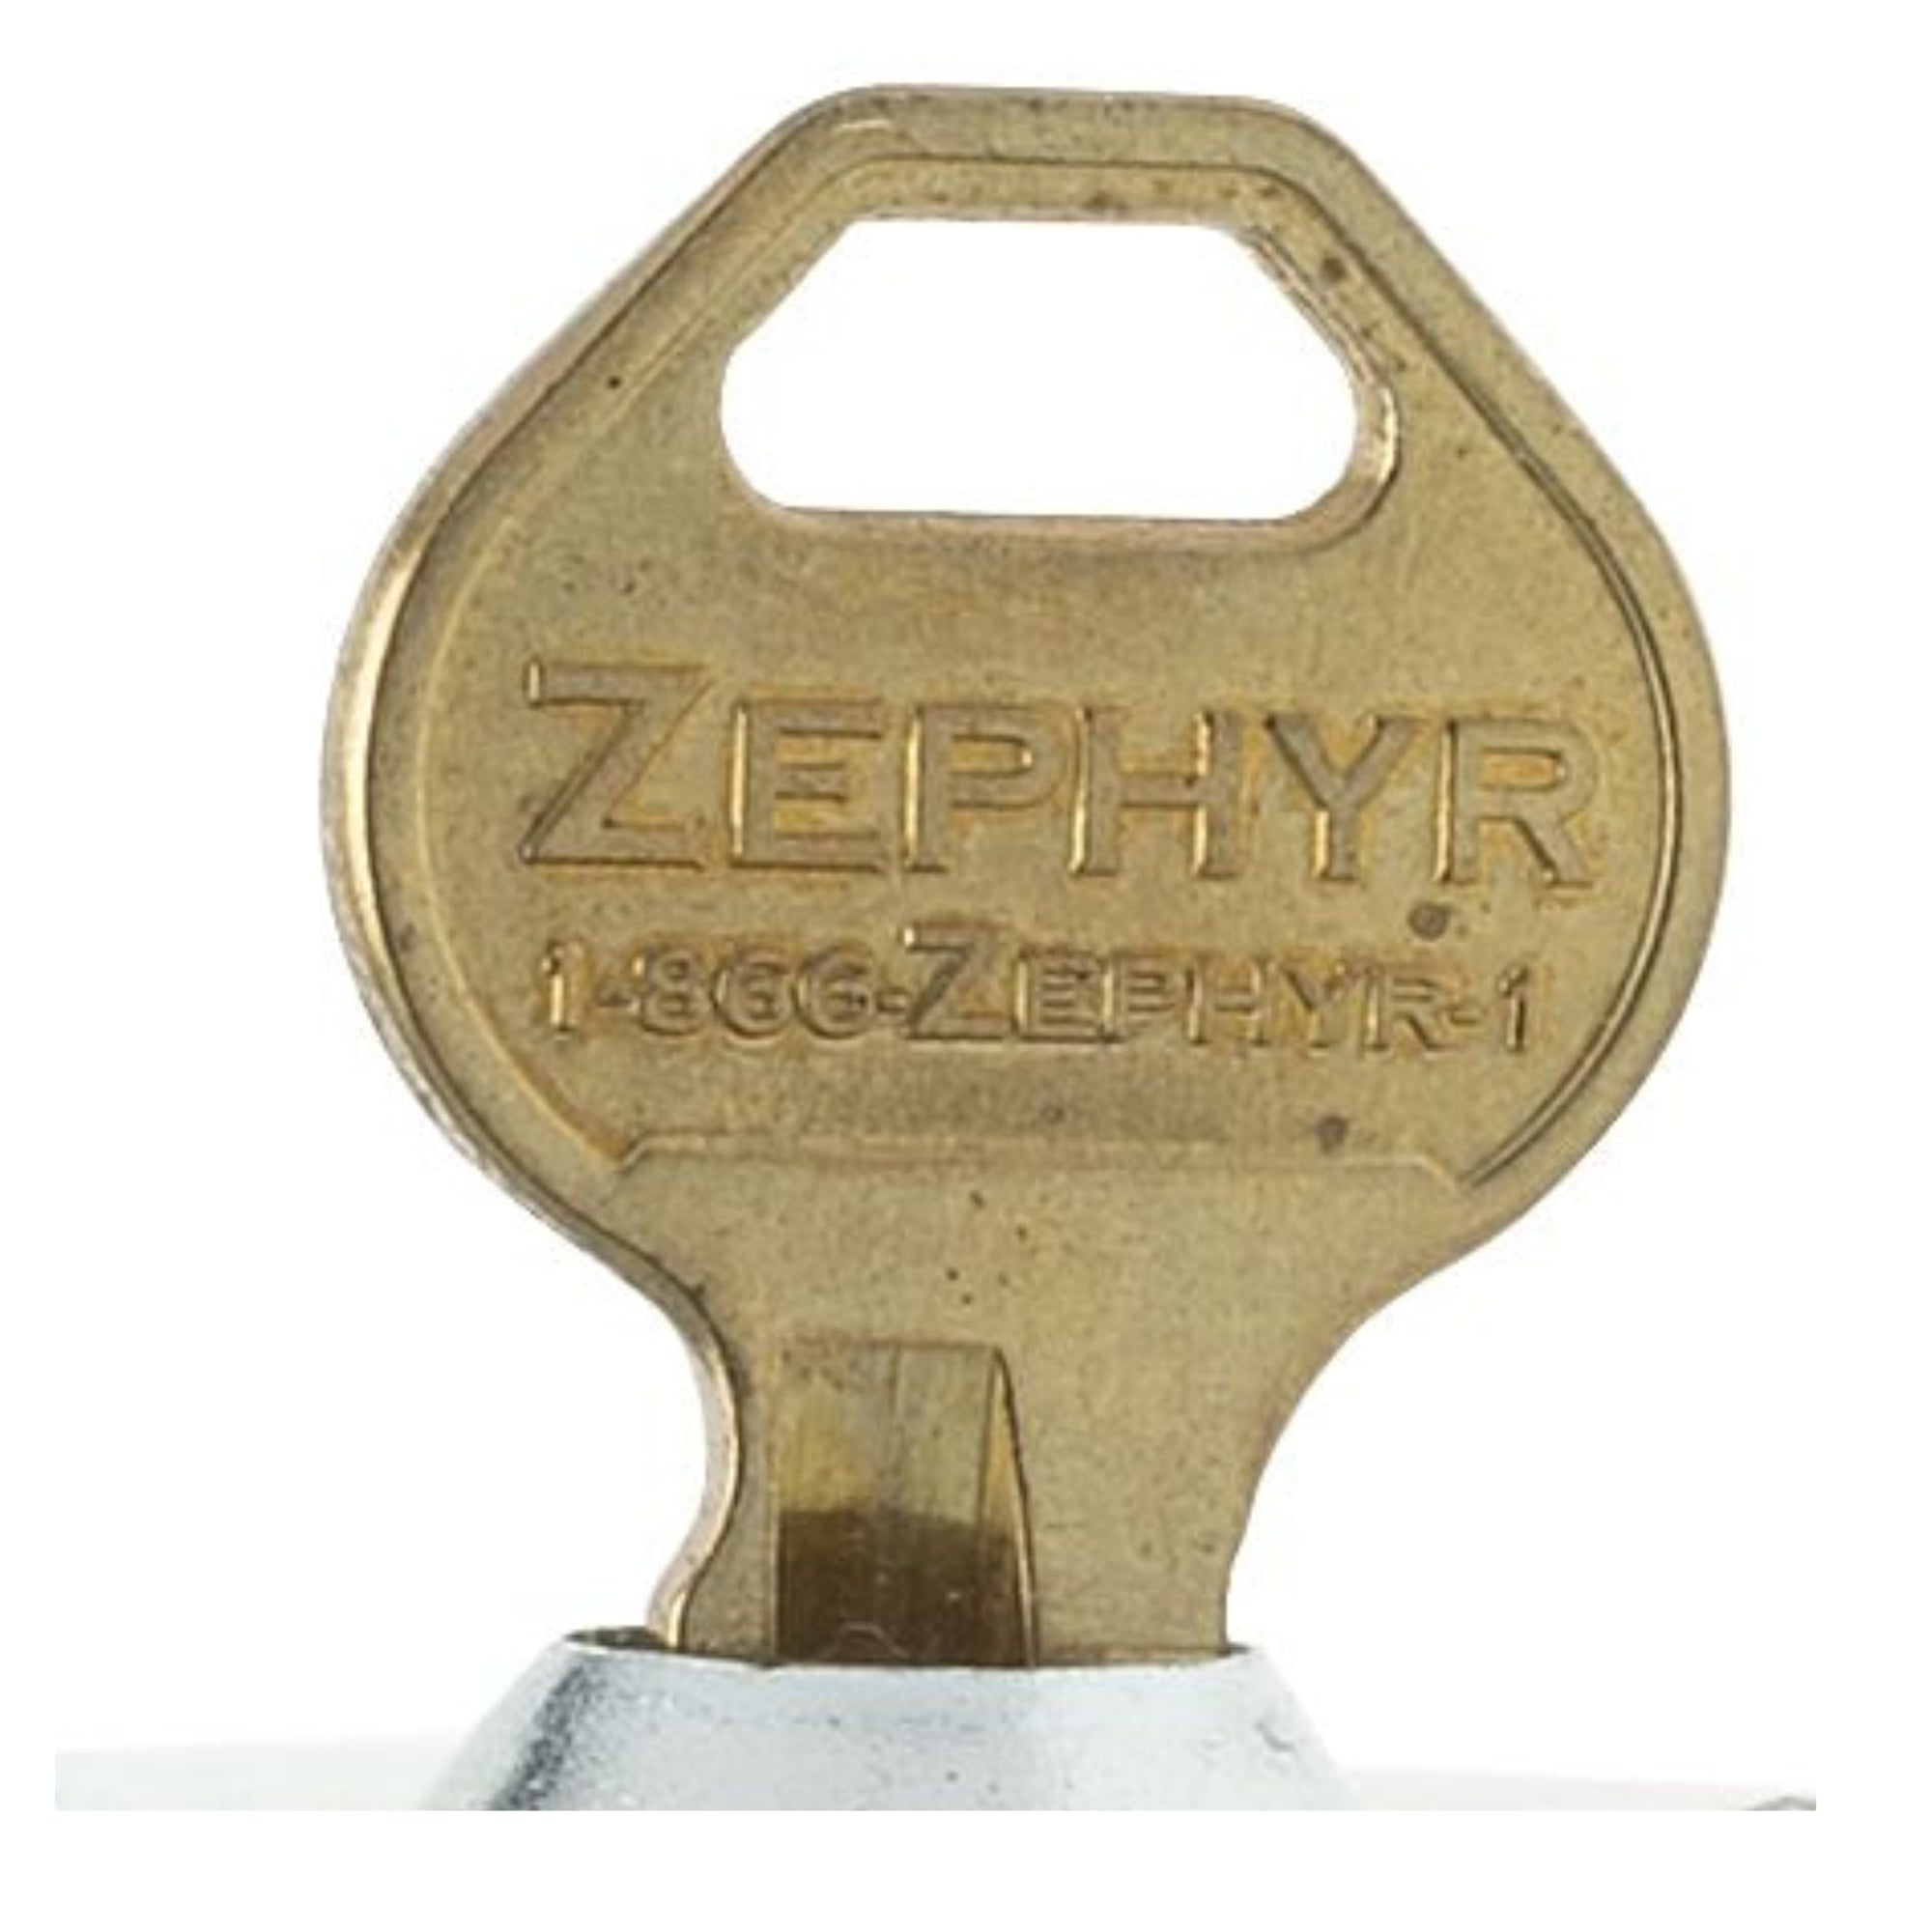 Zephyr Control Key for 1992 Series Built In Combination Locker Locks with Linear Latch Locking - The Lock Source